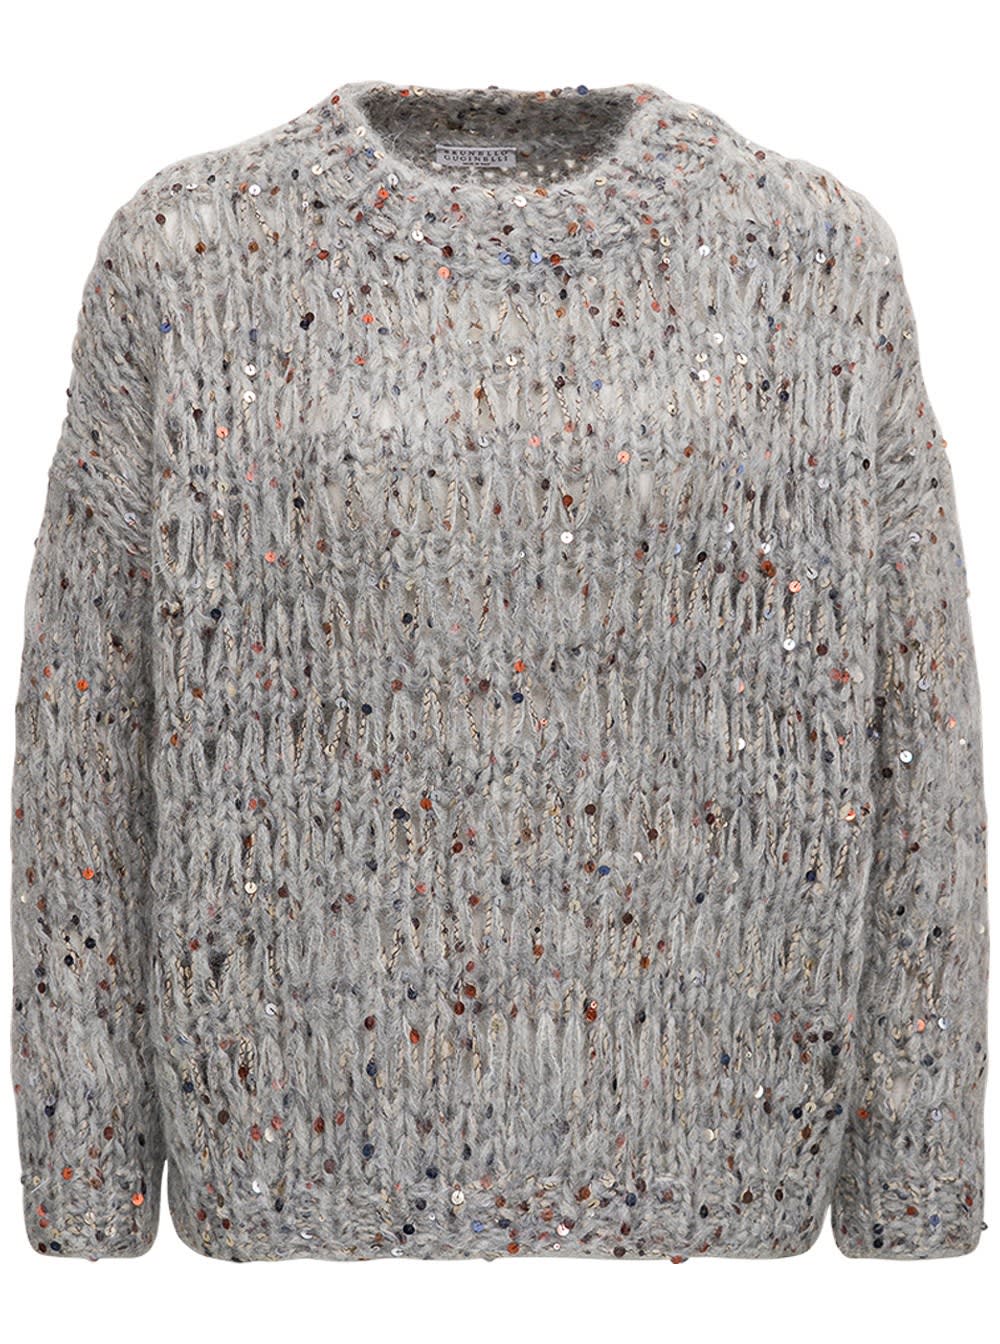 Brunello Cucinelli Mohair Blend Sweater With Sequins